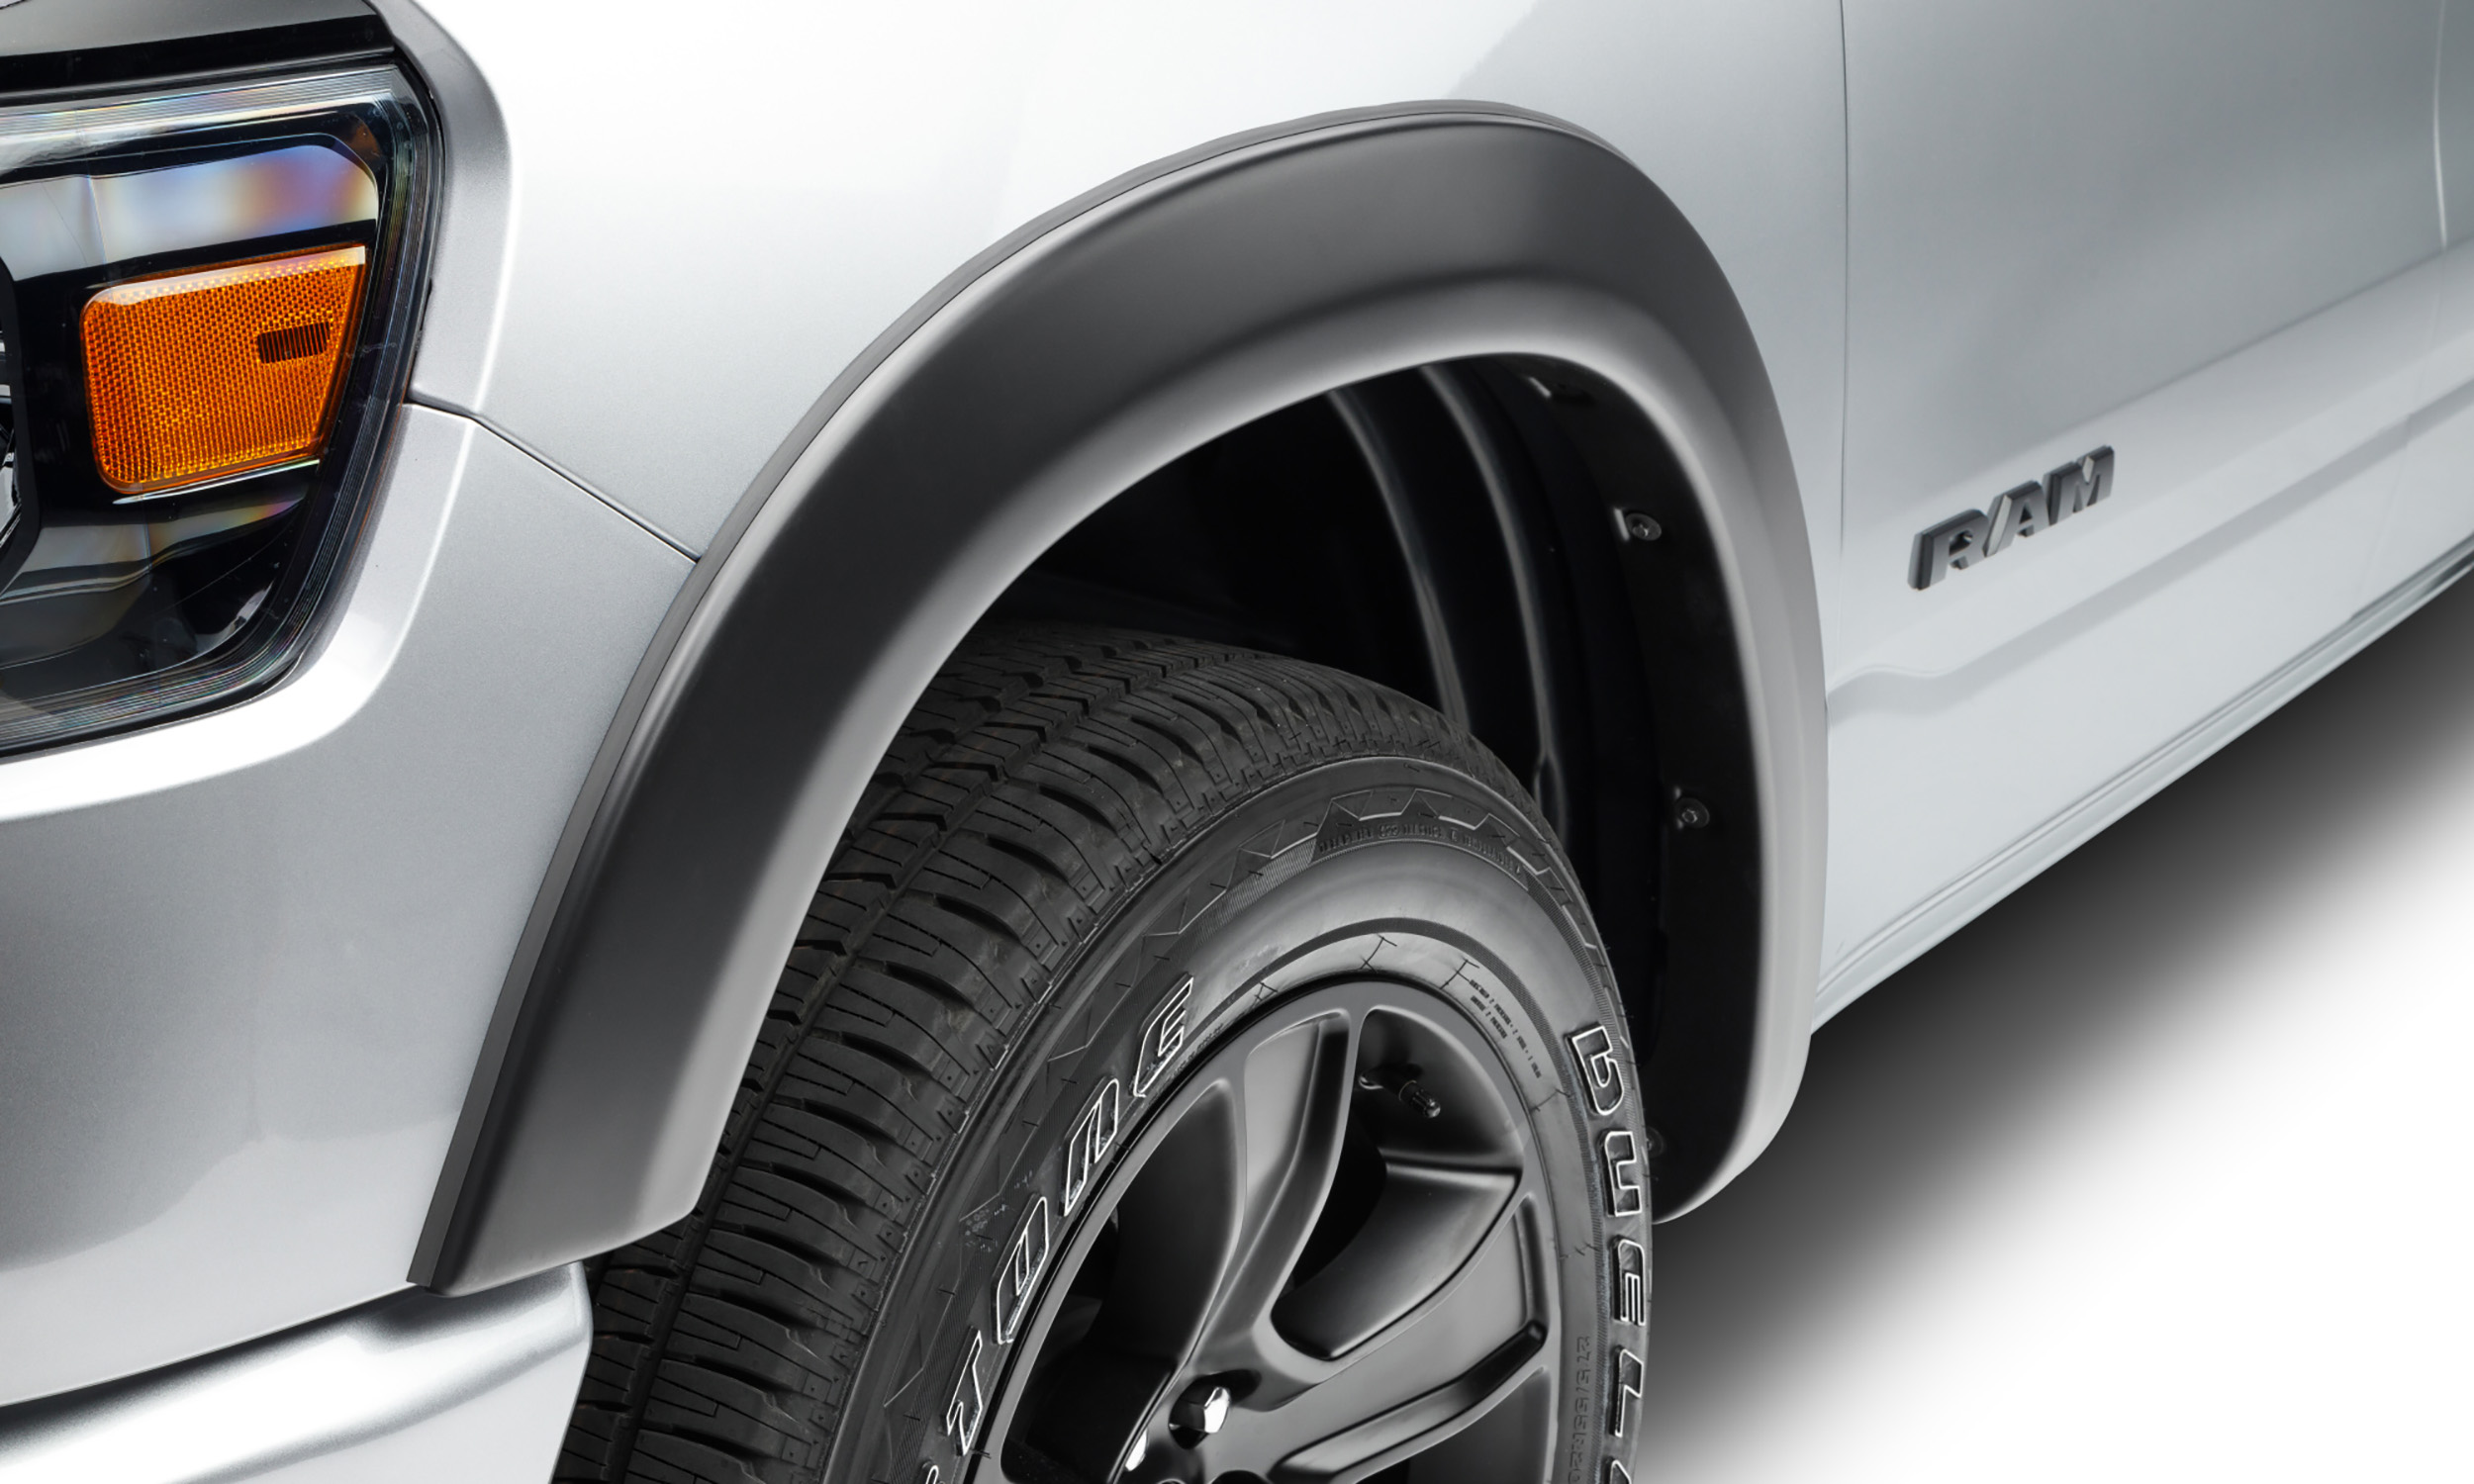 Bushwacker 50057-02 Black OE-Style Smooth Finish Front Fender Flares for 2019-2022 Ram 1500; Will not fit Rebel and TRX models